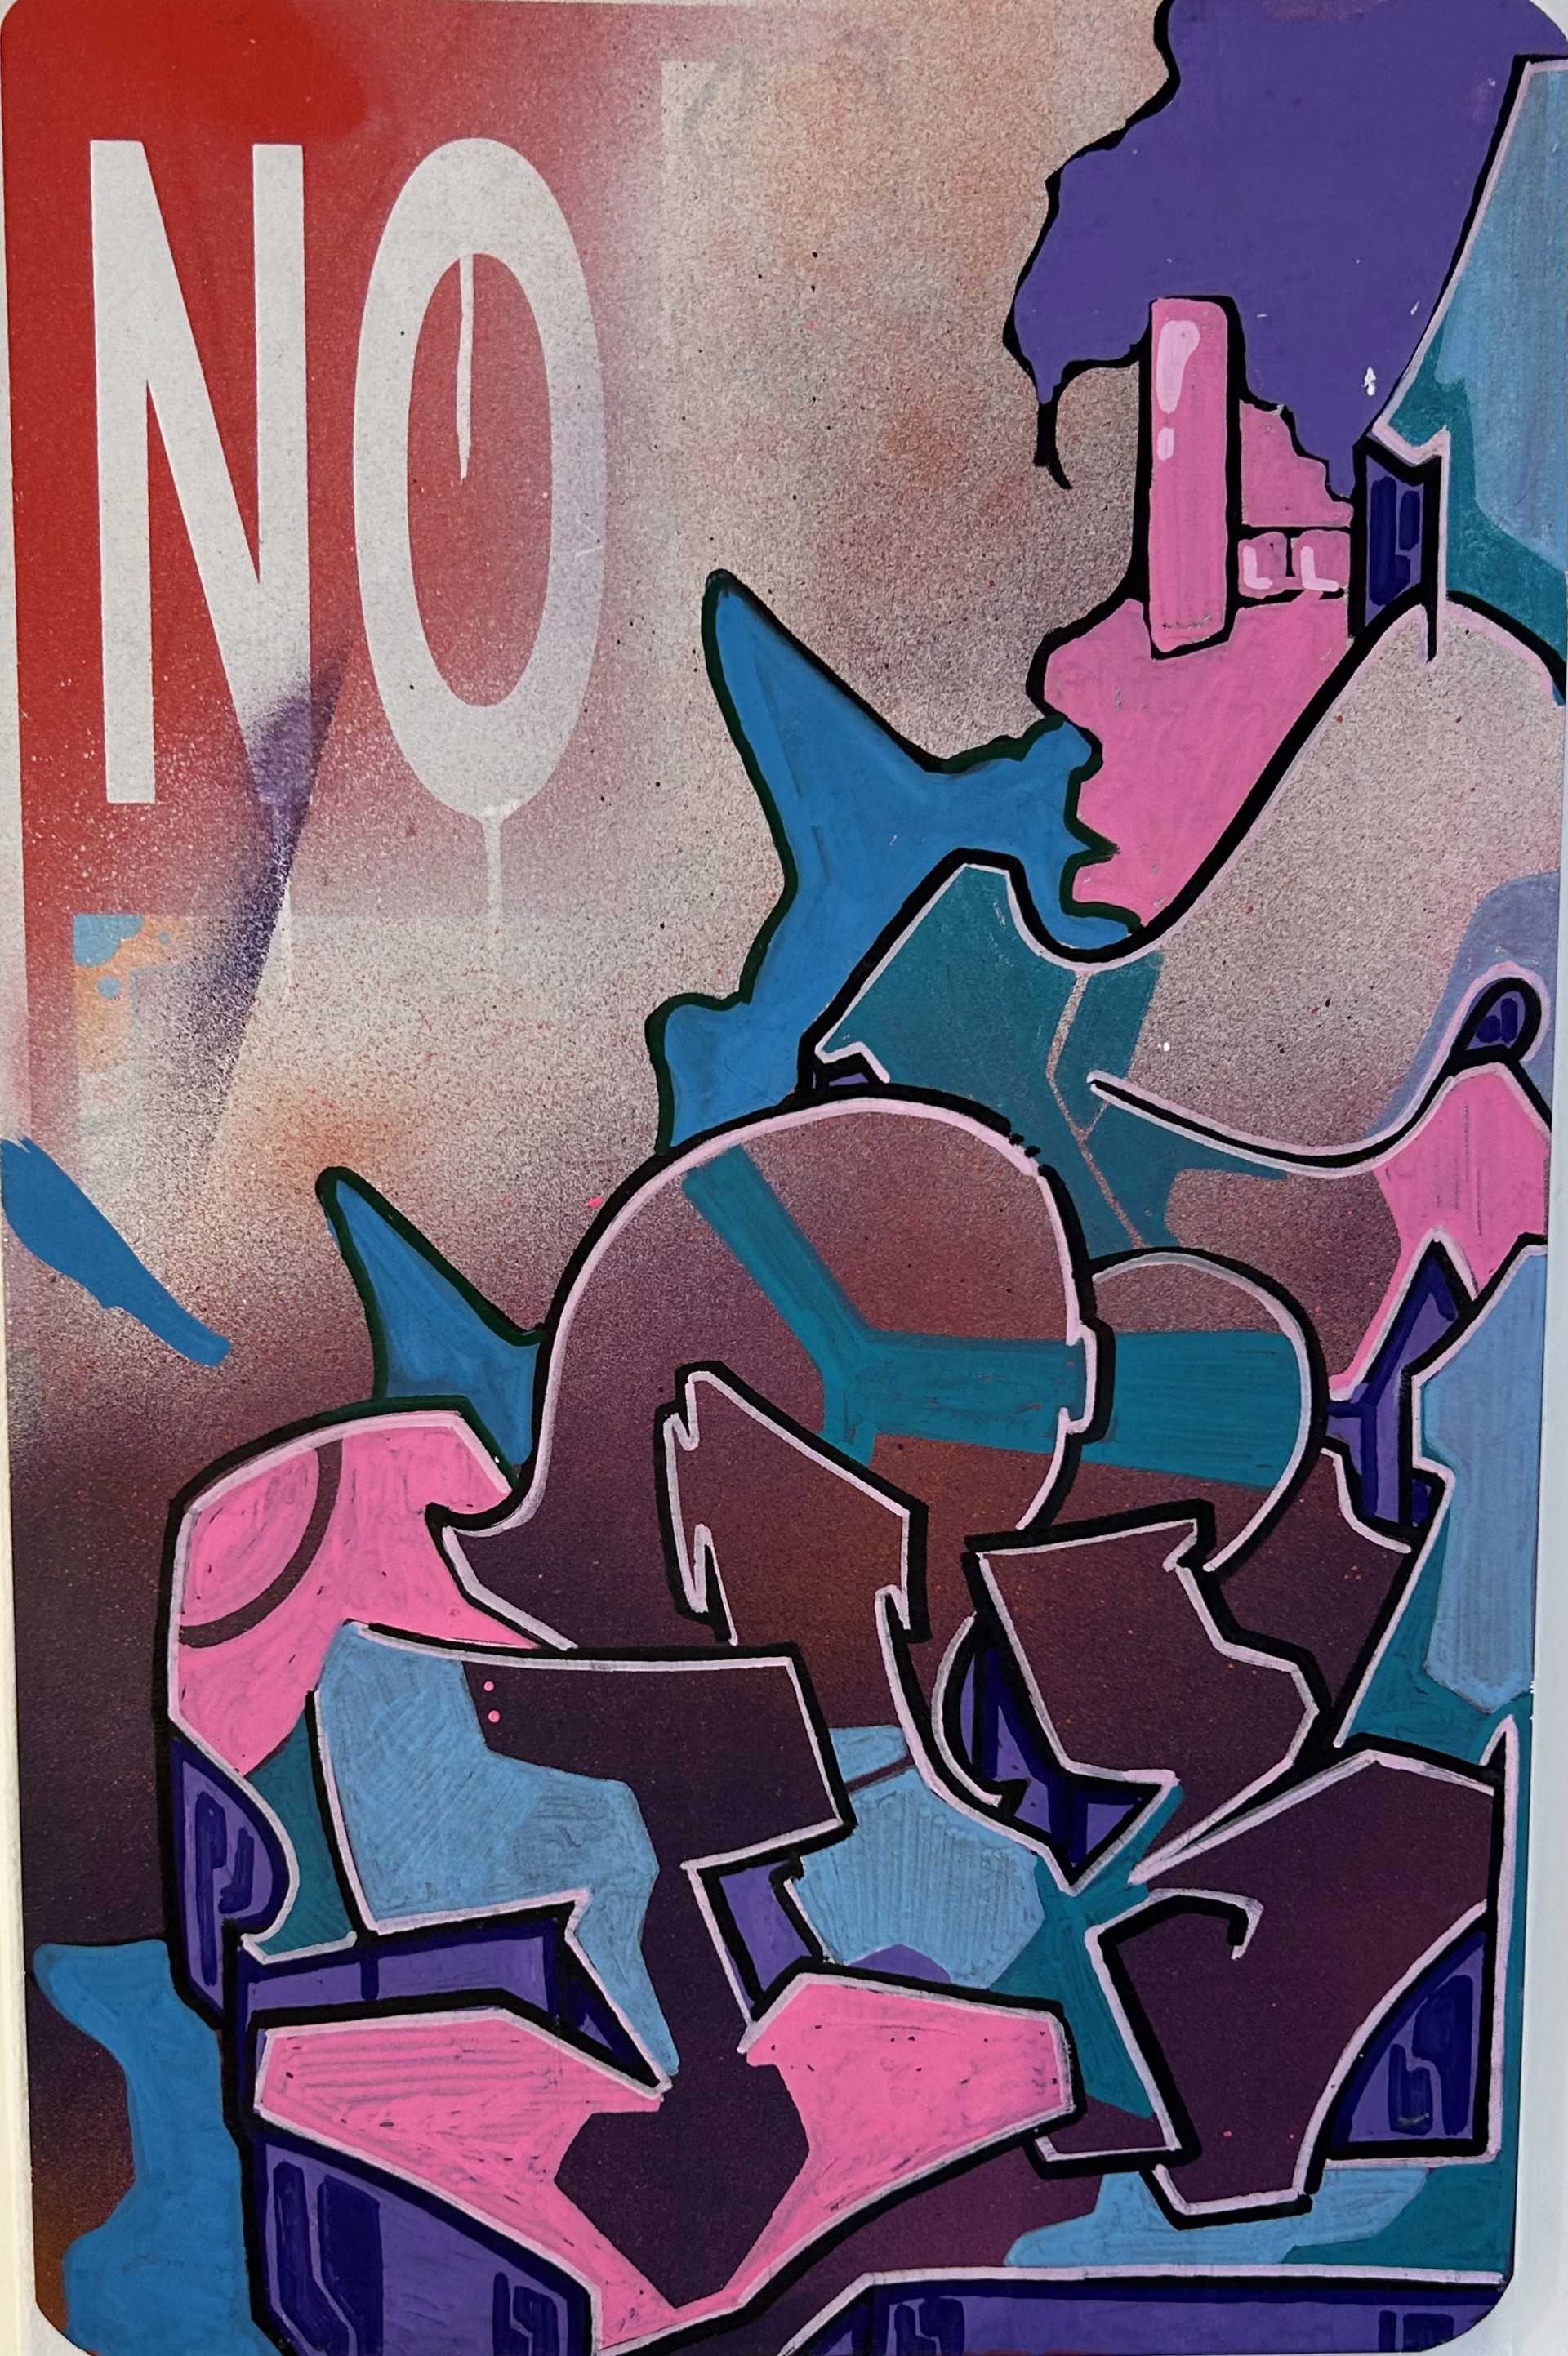 NOT FOR SALE by TKID TNB